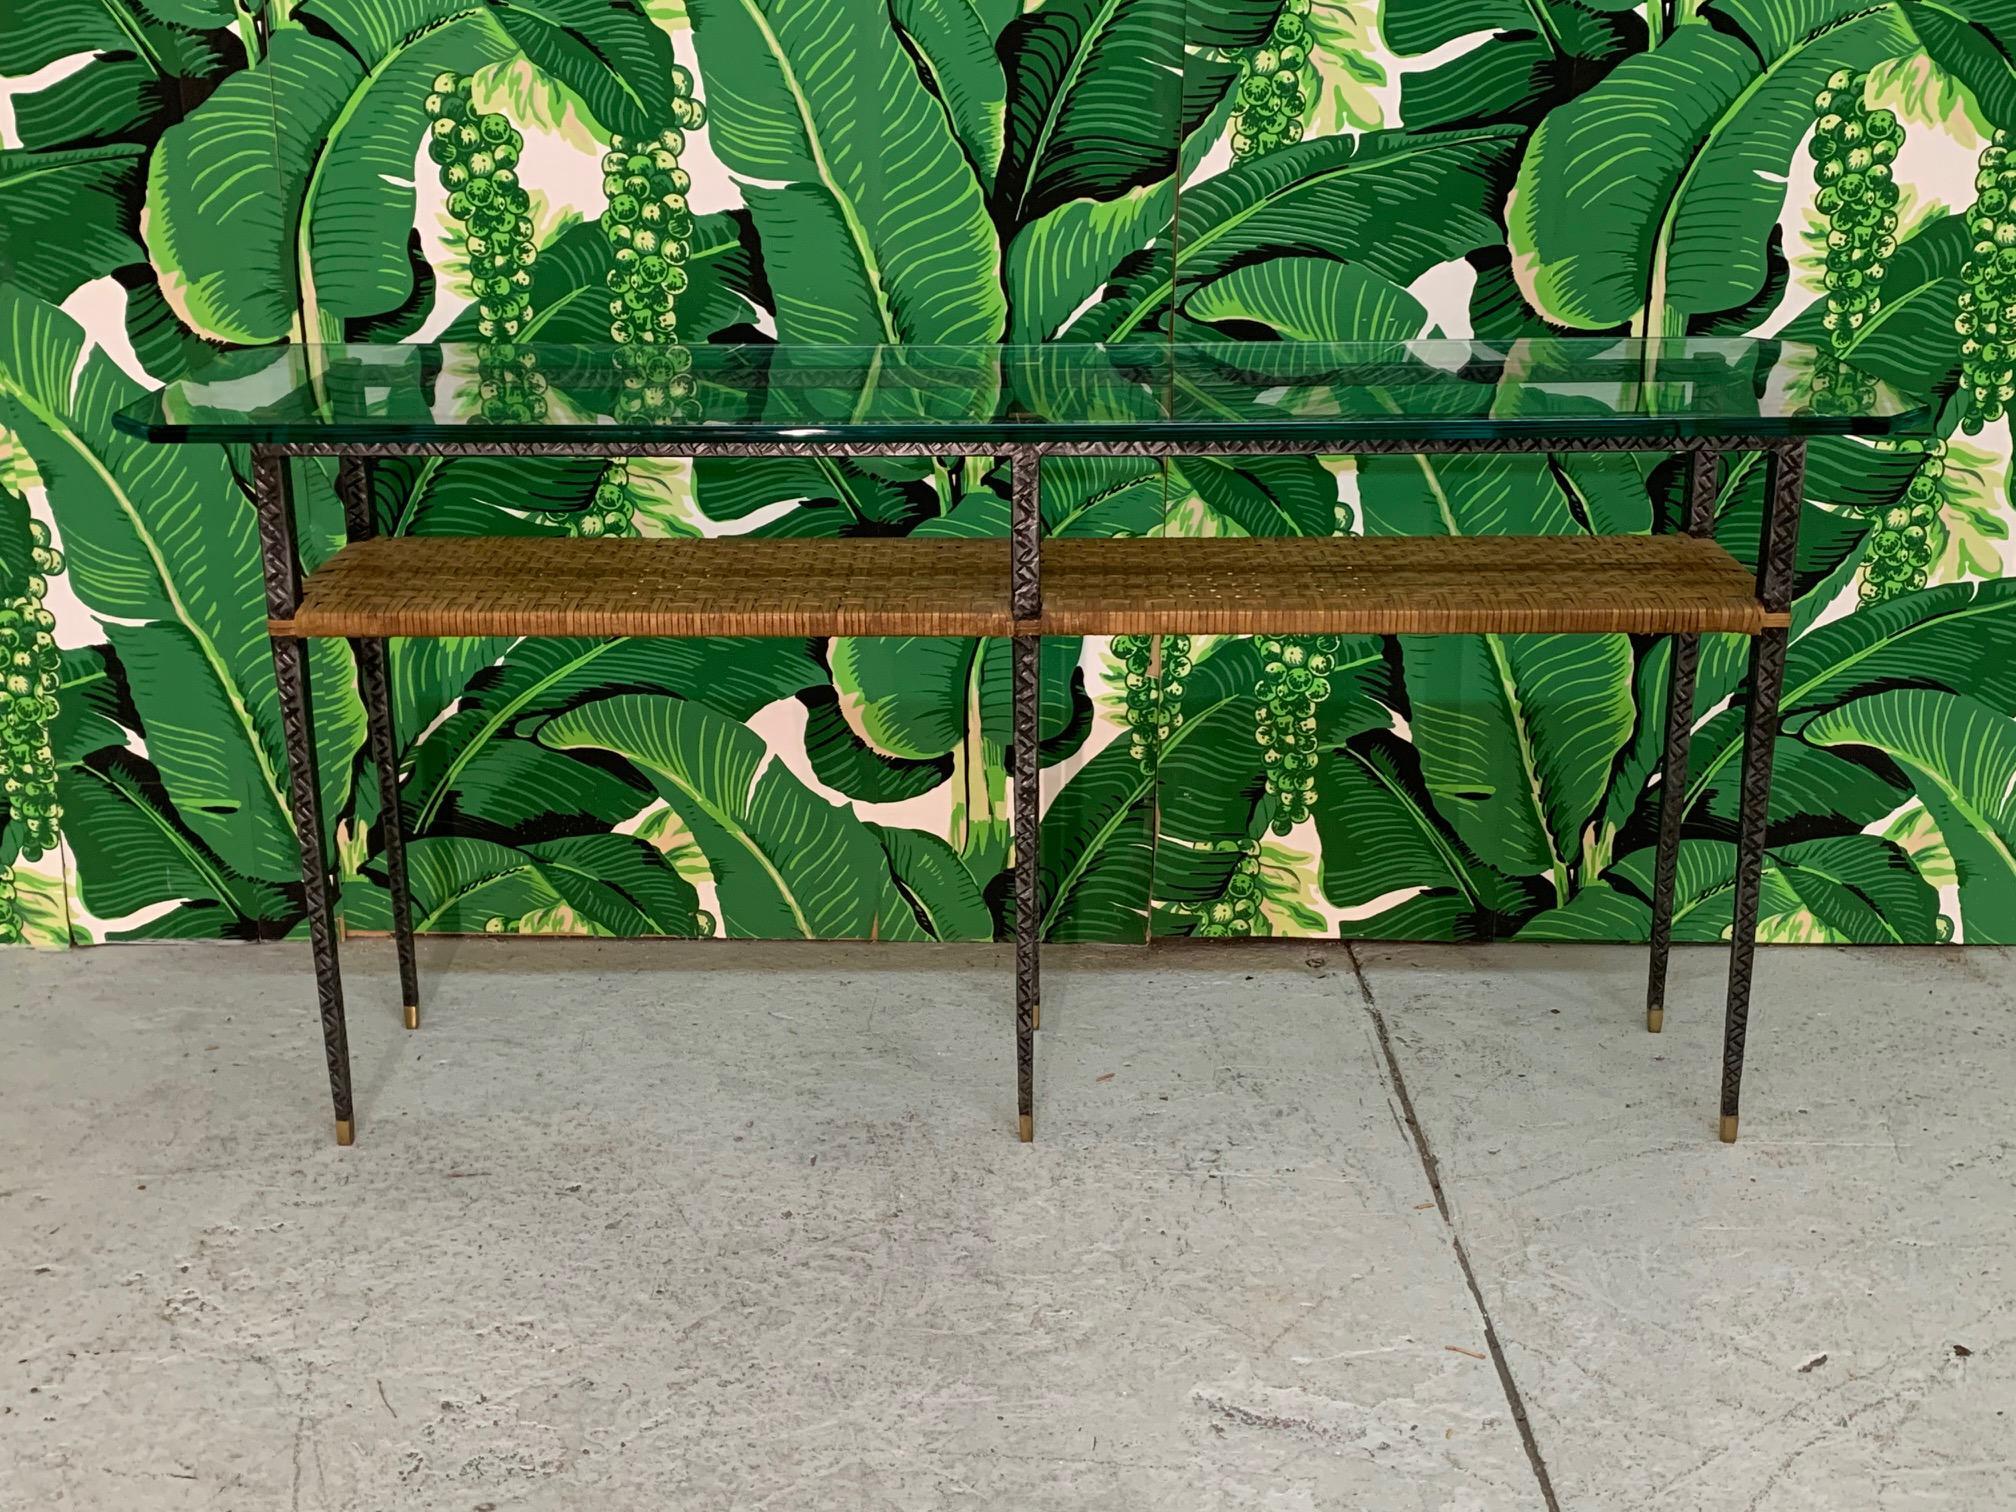 Mixed media console table features a metal frame with diamond cut detailing, brass accents, rattan center shelf, and a glass top. Very good condition with only very minor imperfections consistent with age. Glass top measures 60